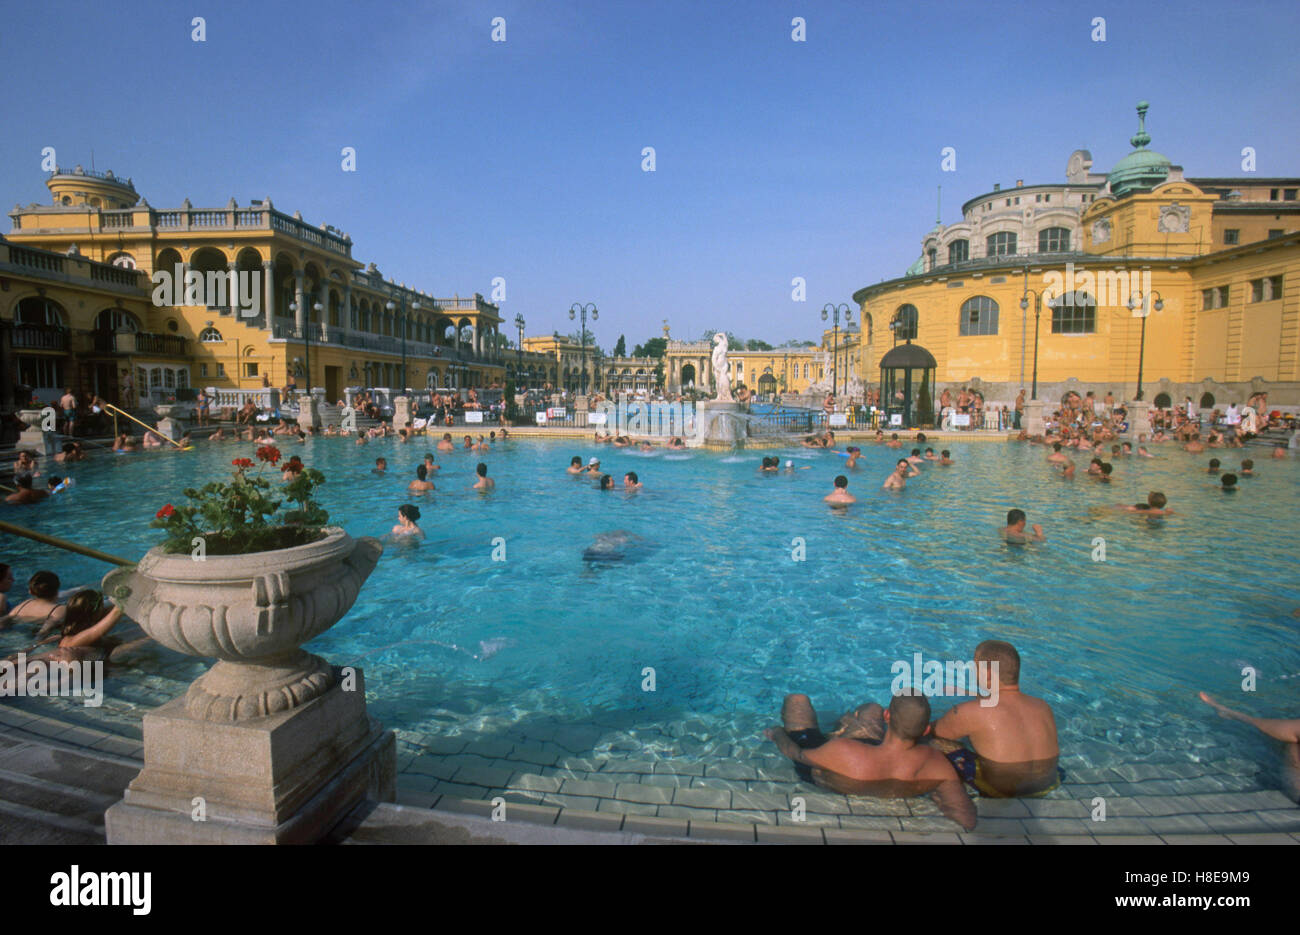 HUNGARY Budapest, Széchenyi Thermal bath, which is heated by geothermal hot water / UNGARN Budapest, Széchenyi Thermalbad, die Baeder werden mit geothermischen heissem Wasser betrieben Stock Photo